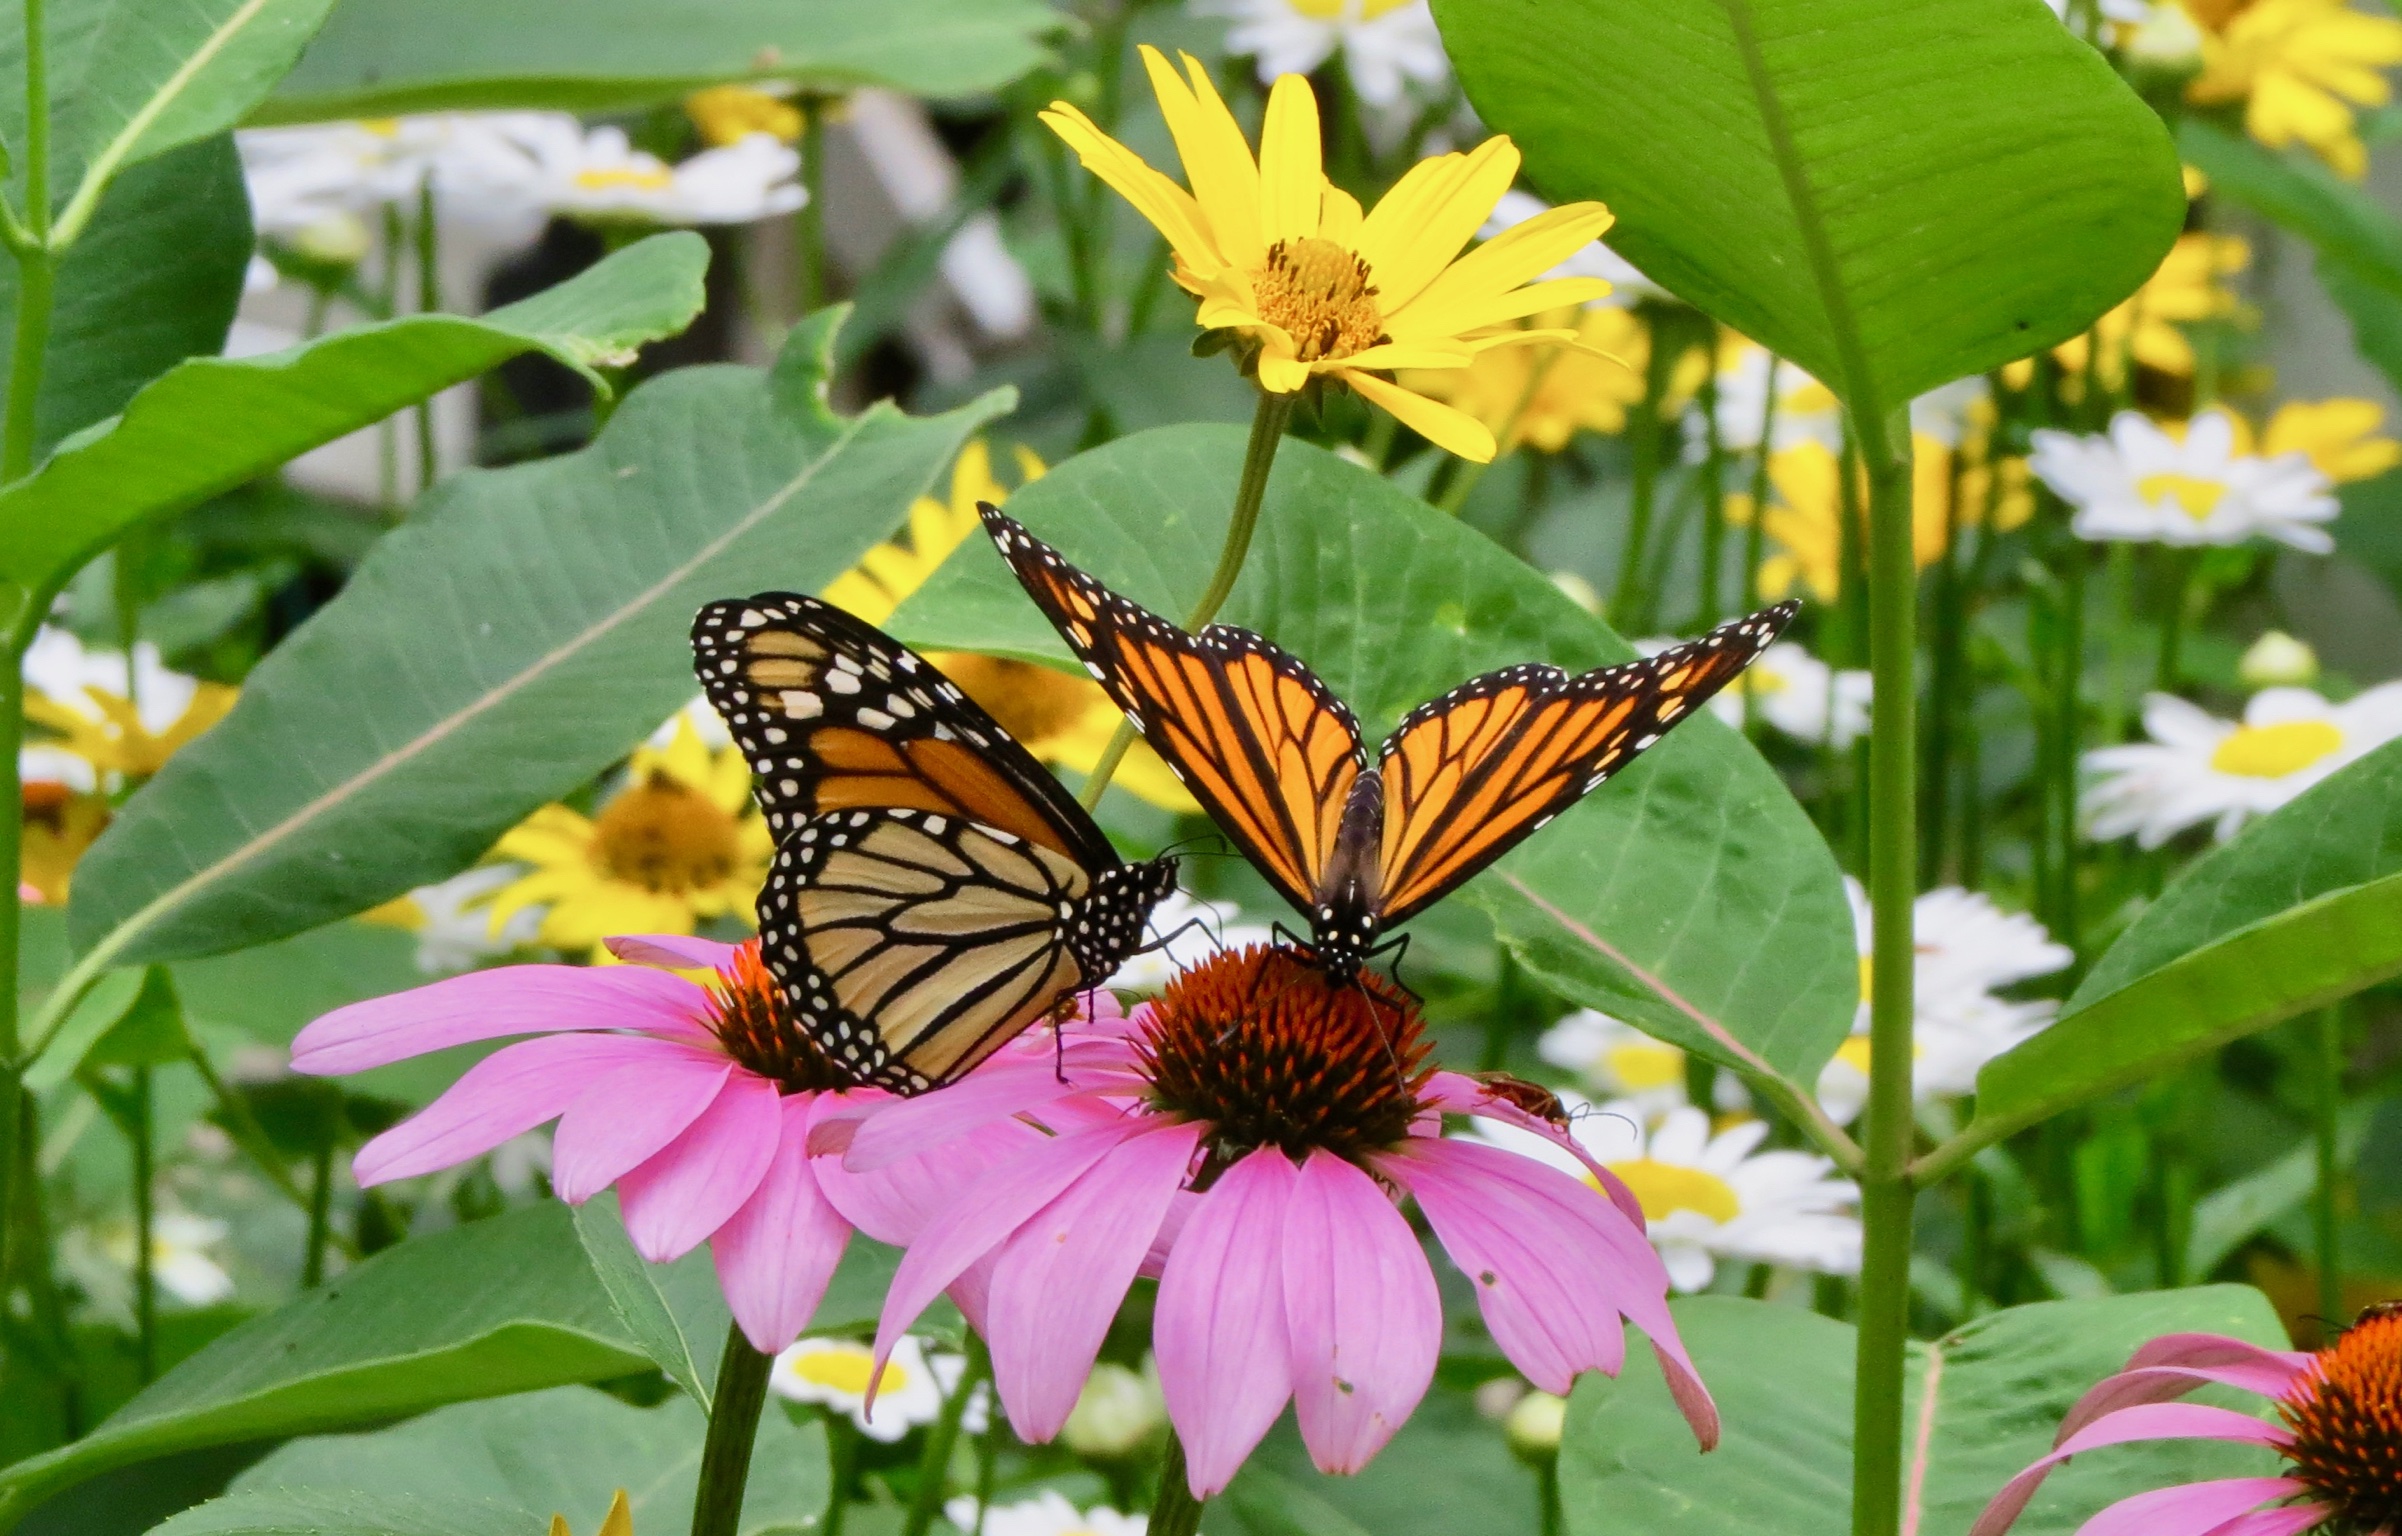 Two butterflies landed on a coneflower